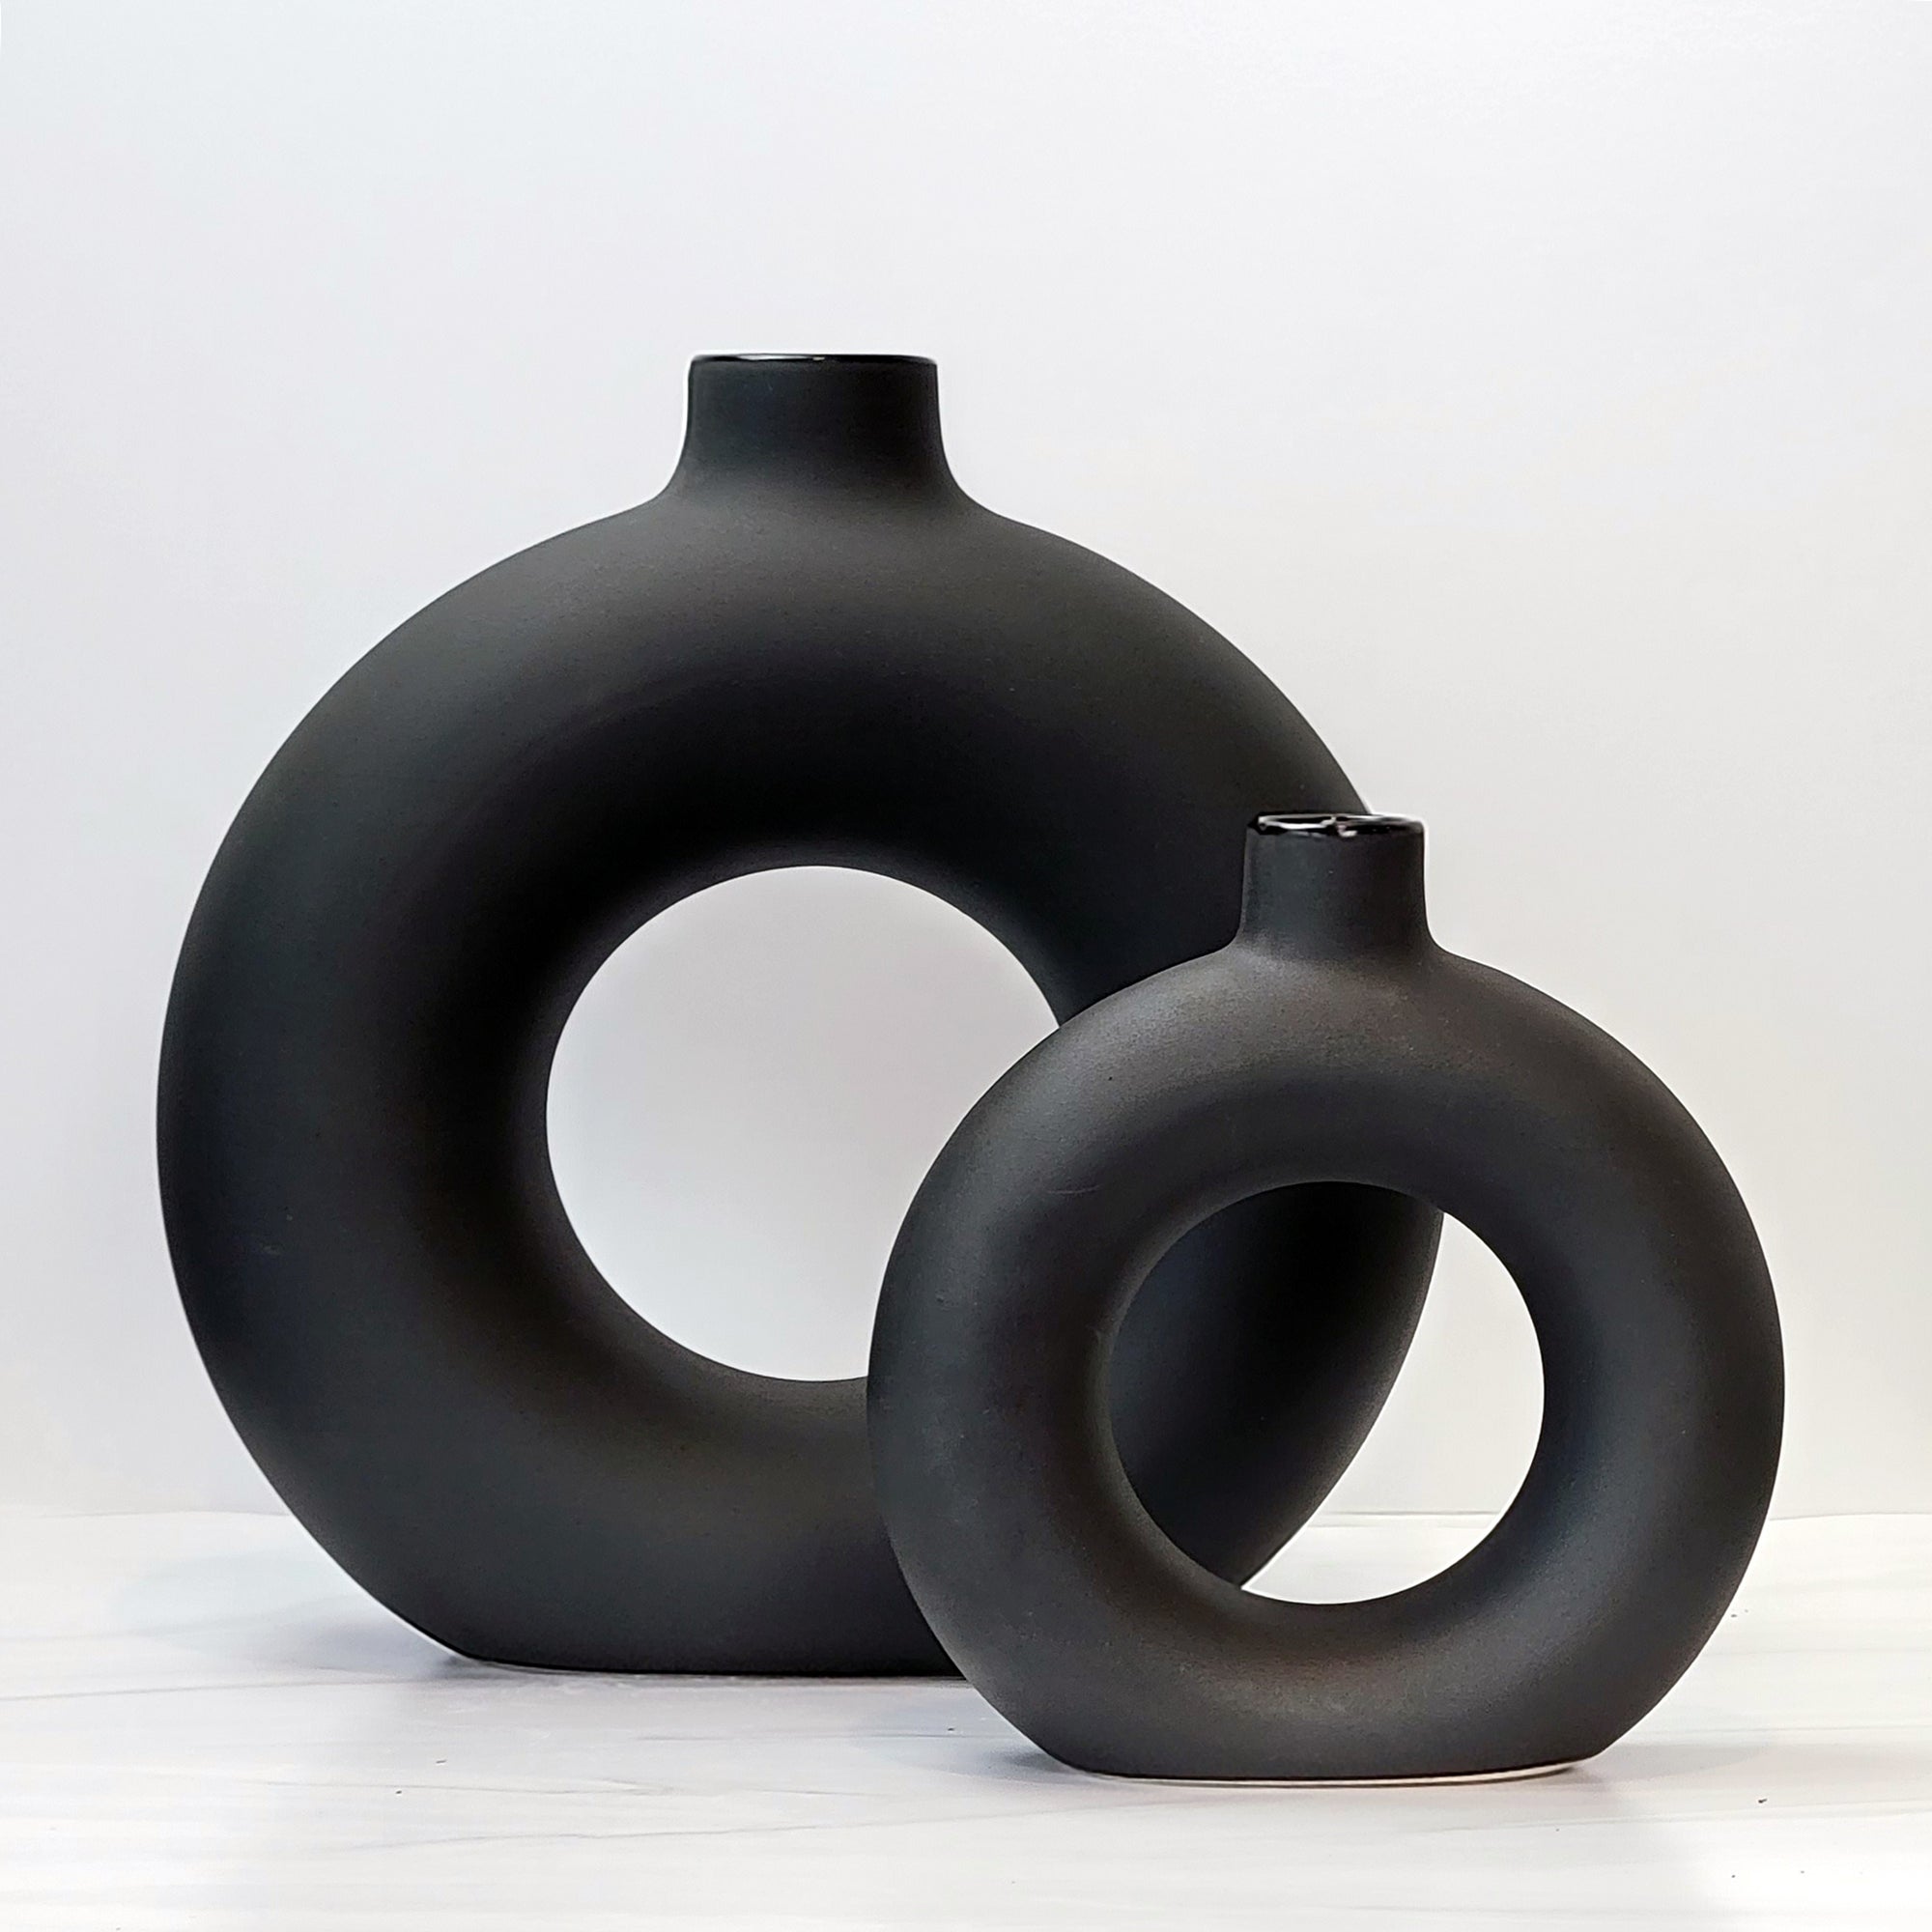 Large and small black doughnut-shaped Otto vases.